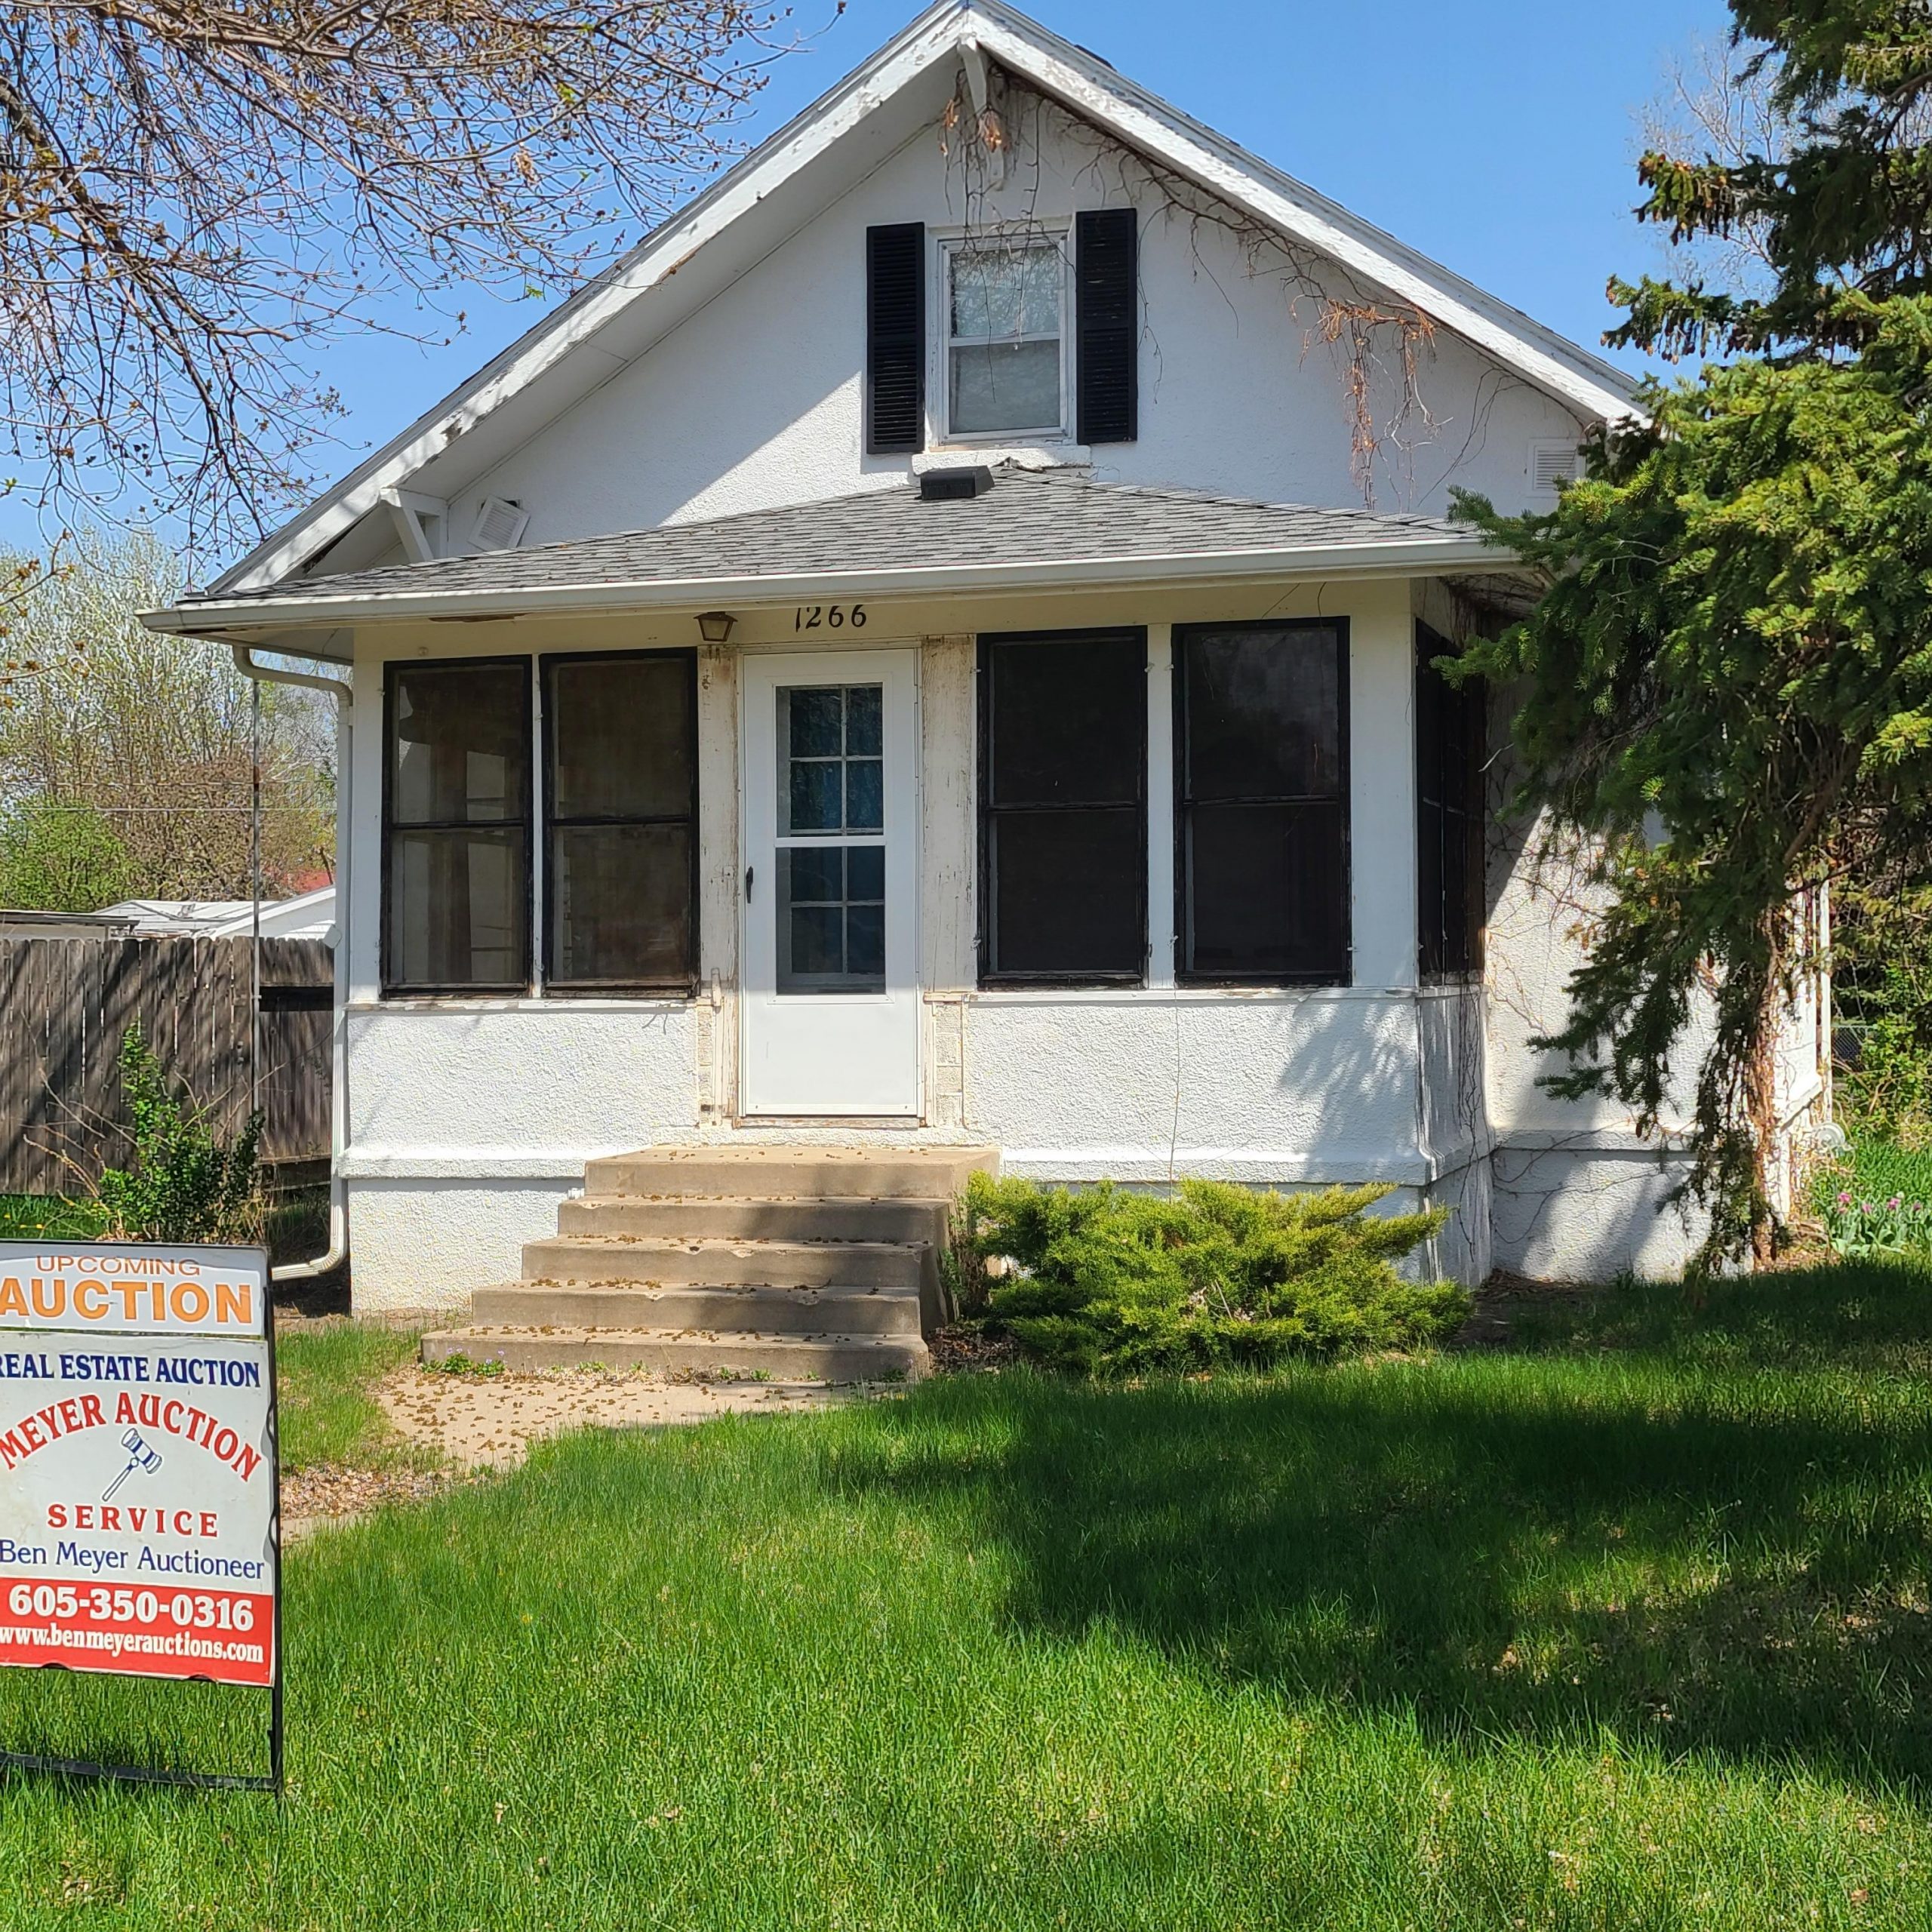 6/12 11AM Live Real Estate Auction 1266 Ill. SW, Huron, SD